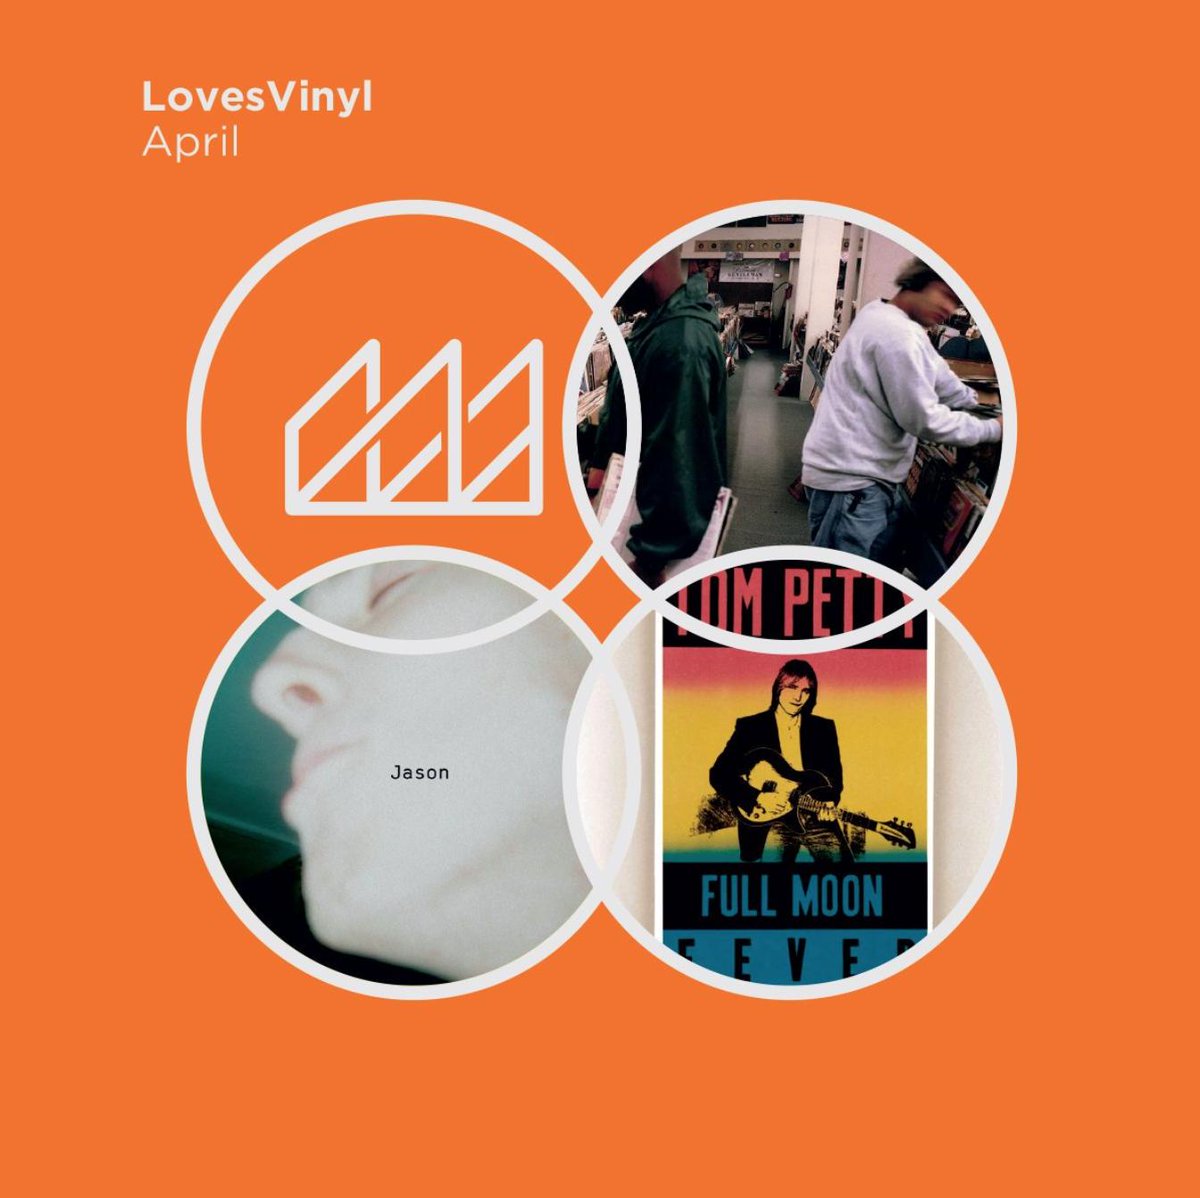 Decisions decisions! Which @lovesvinyl_com album to choose from these 3 gems? @tompetty Full Moon Fever, ⁣⁣⁣⁣@djshadow Endtroducing & @oemperormusic Jason (Last chance if u want to join the club this month (€29 for ur choice + compilation EP +bonus collectable) #vinyl ⁣⁣